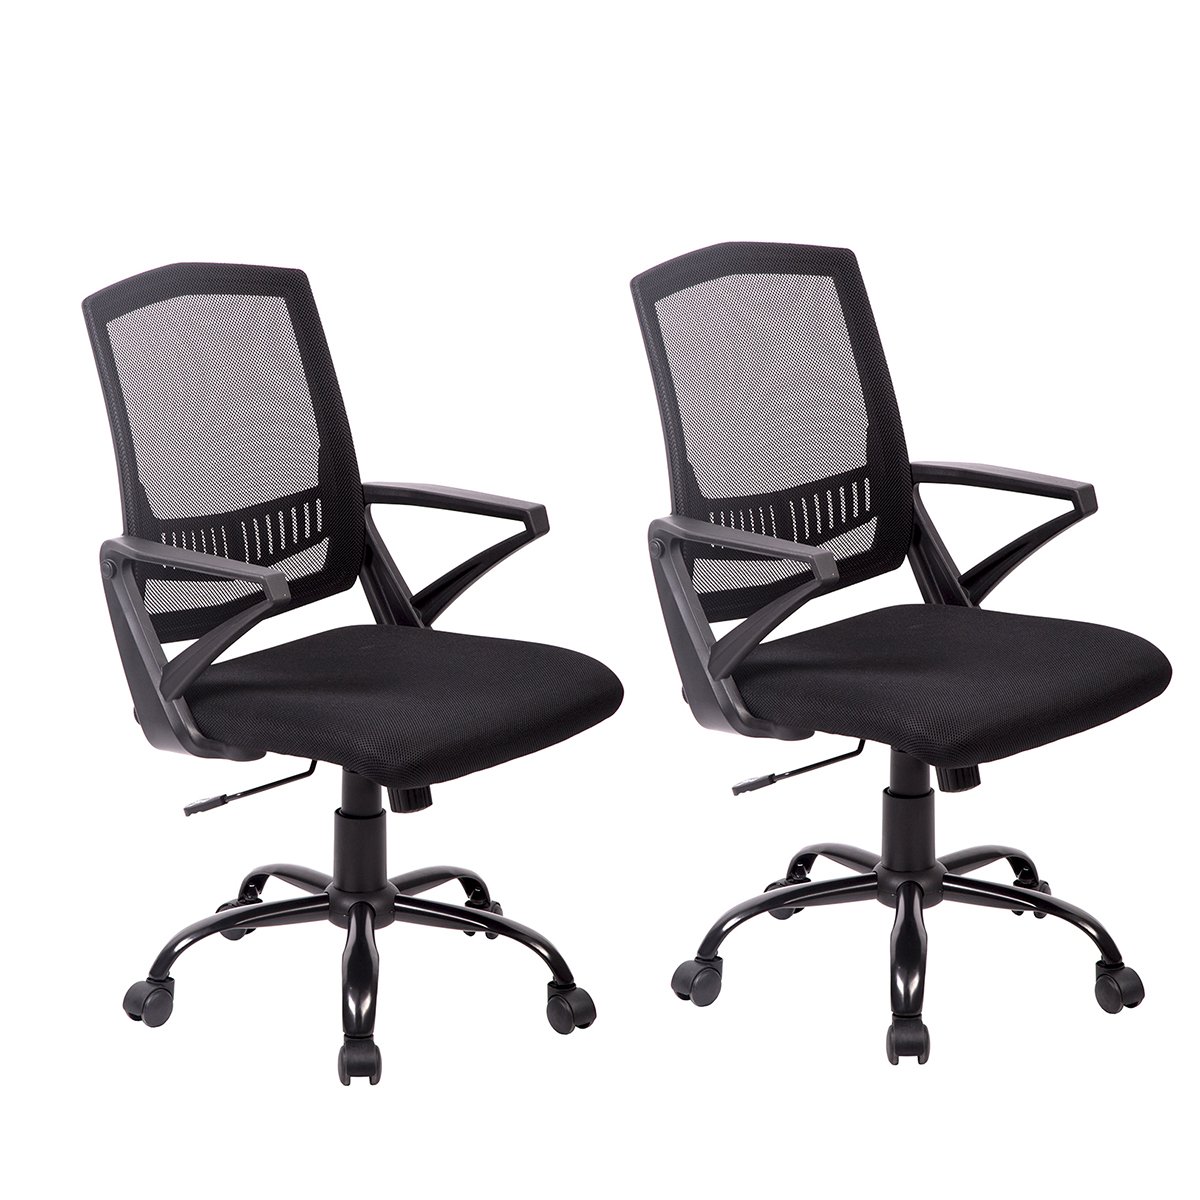 Best office chairs under $100 In 2019[Buyer’s Guide] - The Home Reviews